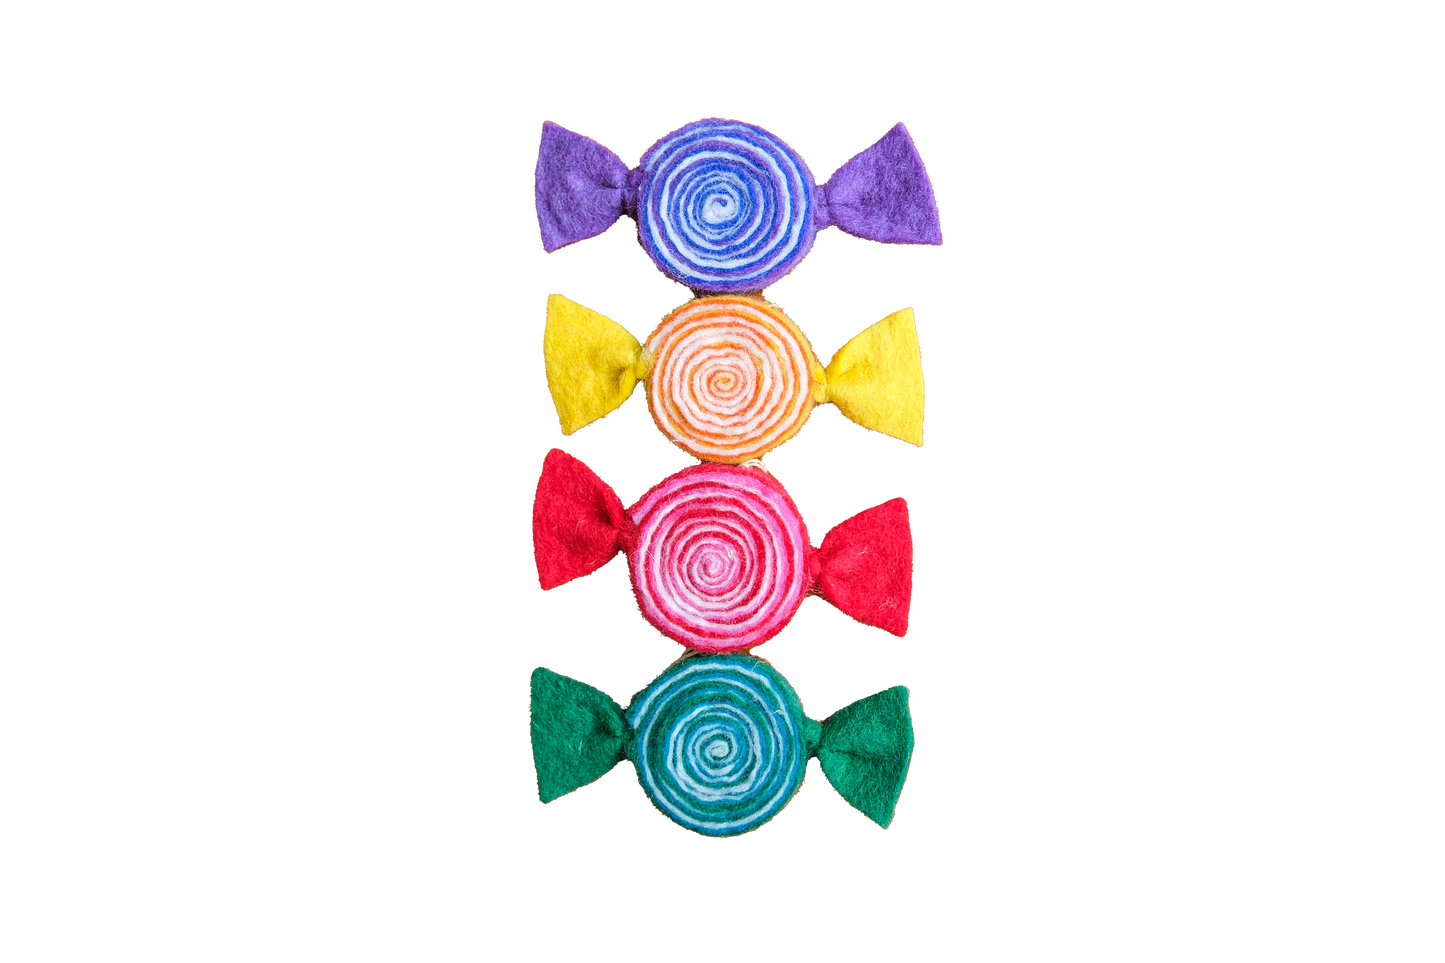 This Global Groove Life, handmade, ethical, fair trade, eco-friendly, sustainable, felt, purple, yellow, red, and green, Rainbow candy ornament set was created by artisans in Kathmandu Nepal and will be a beautiful and fun addition to your Christmas tree this holiday season.